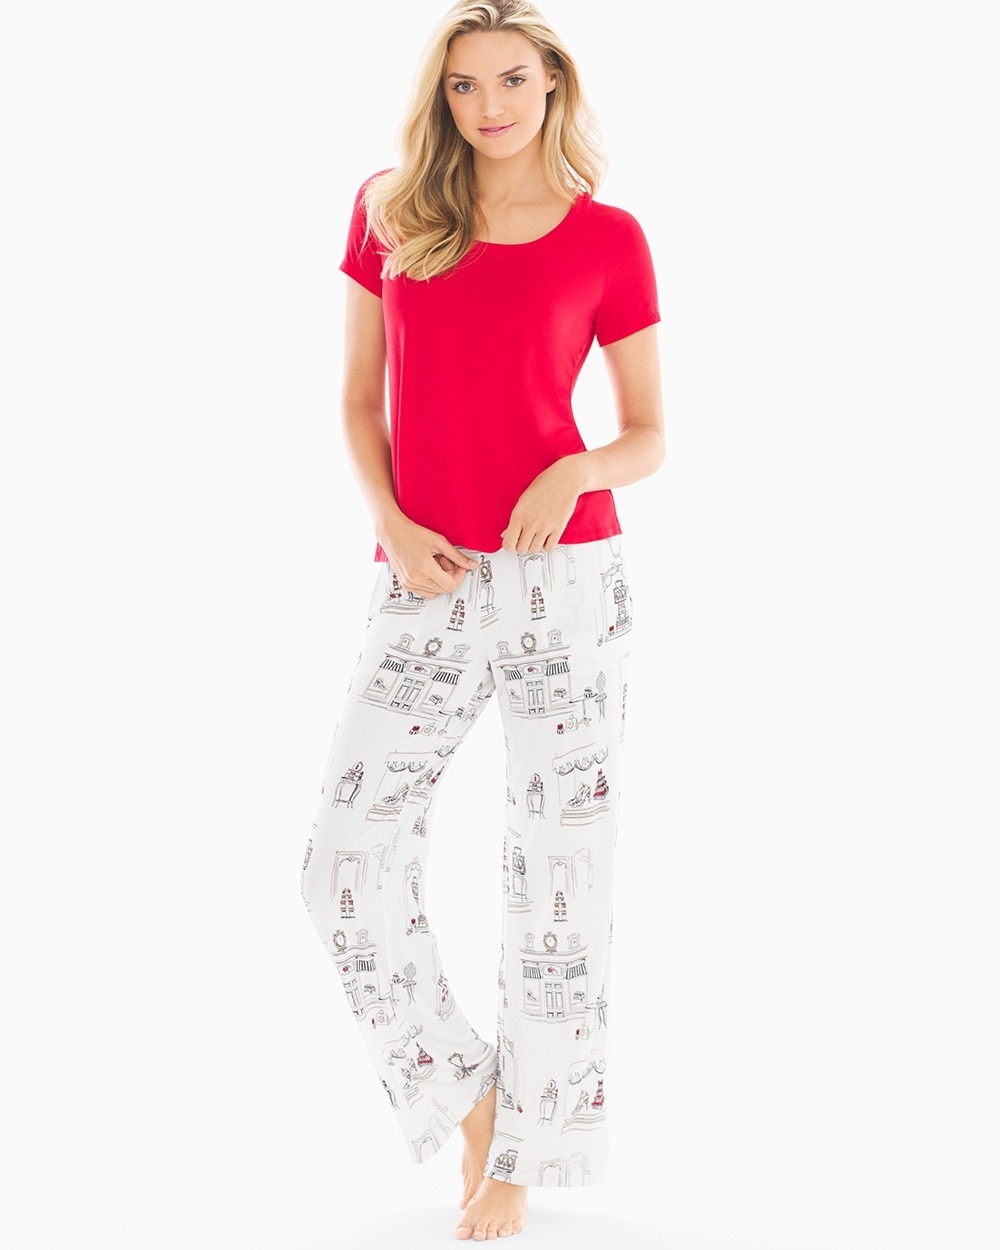 Cool Nights Short Sleeve Pajama Set Accessorize Festive Red TL